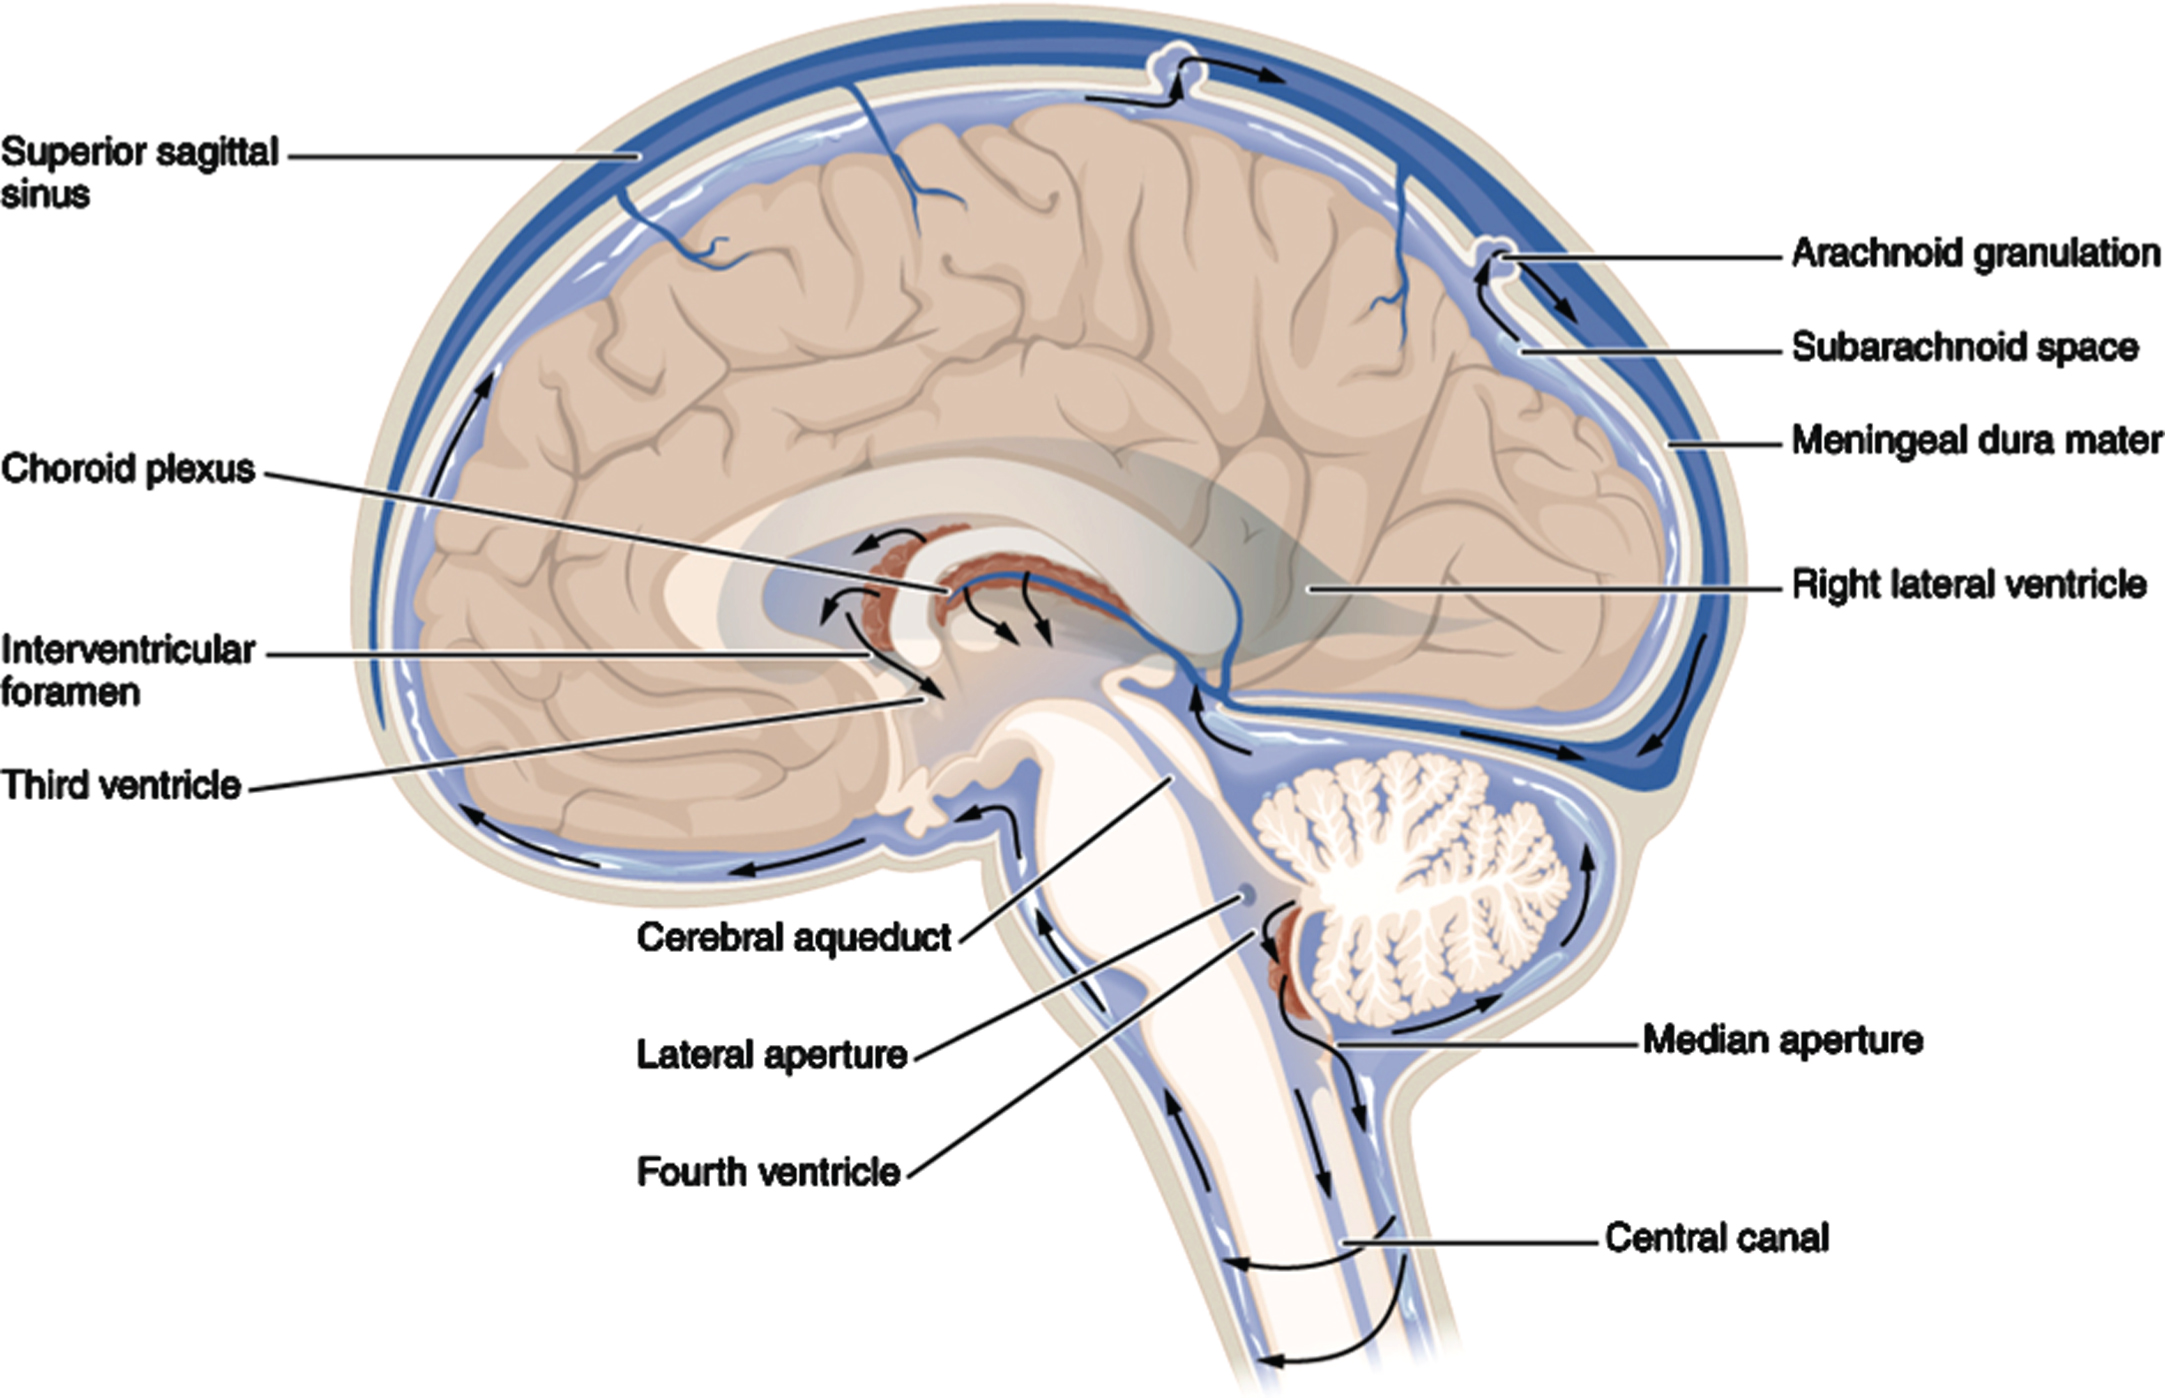 Full glymphatic brain CSF flow system. Net flow starts in centrally-located lateral ventricles (right and left), through the interventricular foramen, to the third ventricle, then through the very narrow central aqueduct (CA) into the fourth ventricle. From there, the net CSF flow is into the brainstem and spinal cord, then into various cisterns (see Fig. 8), and finally into the subarachnoid space (SAS) covering the brain cortex. The CSF then either enters the brain in the perivascular space surrounding arteries entering the cortex or moves through the arachnoid granulations and exits from the glymphatic system. The CSF enters the cerebral cortex, but the mechanism and location of the CSF’s brain waste solutes exit from the cerebral cortex is under debate. Source: Wikipedia commons 1317_CFS_Circulation.jpg.